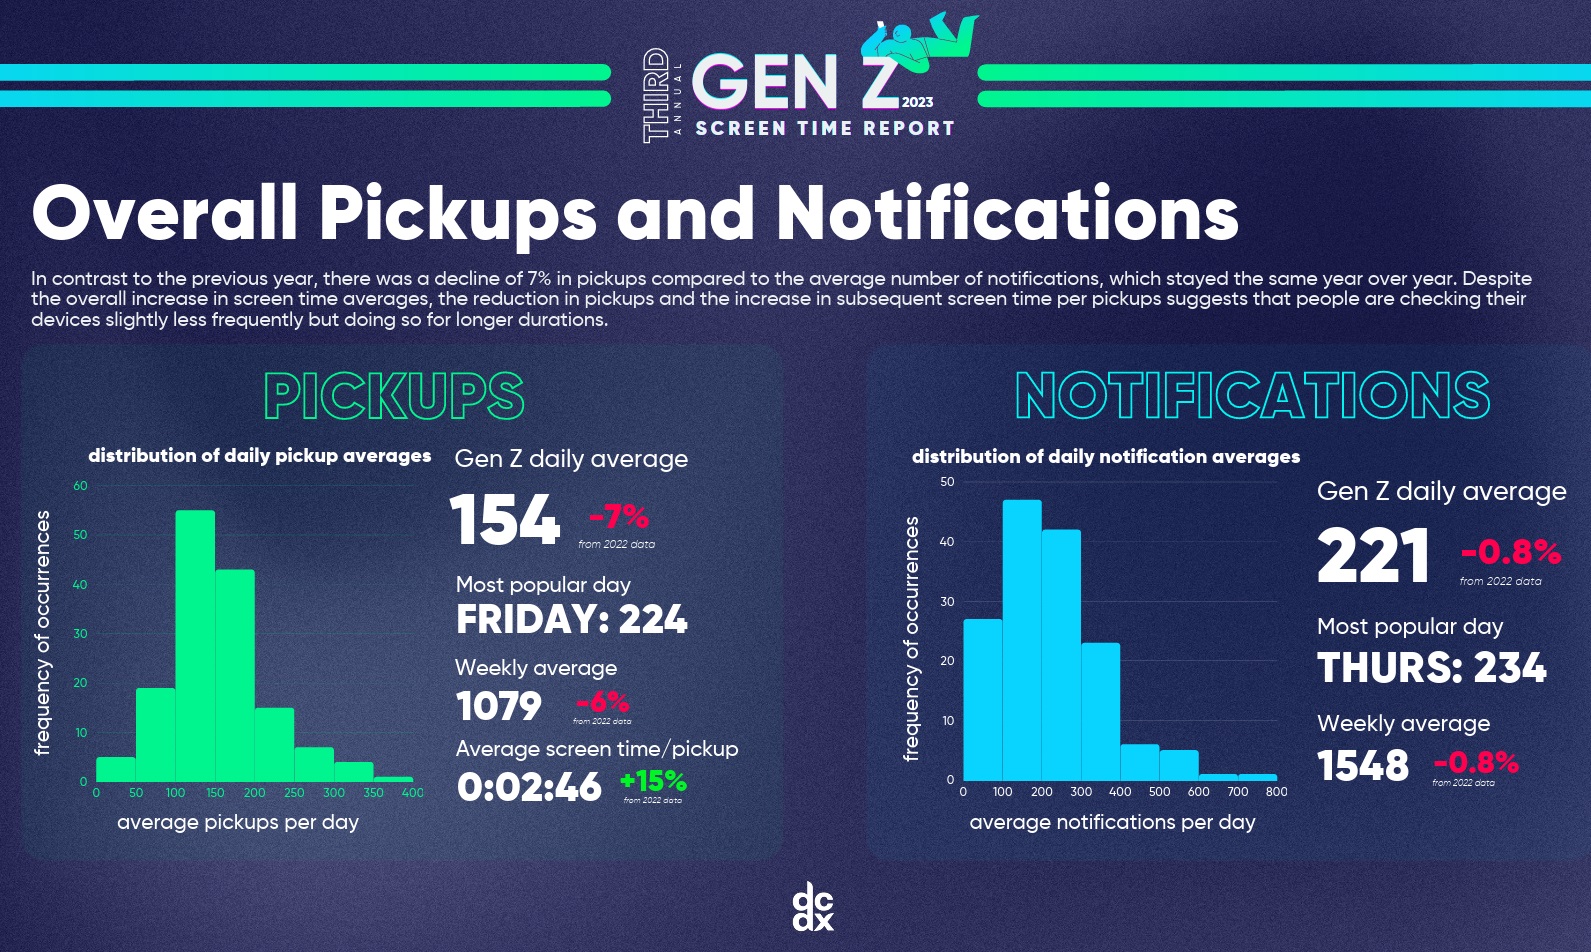 TikTok dominates Gen-Z's screen time, with a 50% increase; Instagram ranks second, Snapchat sees a 29% decline.